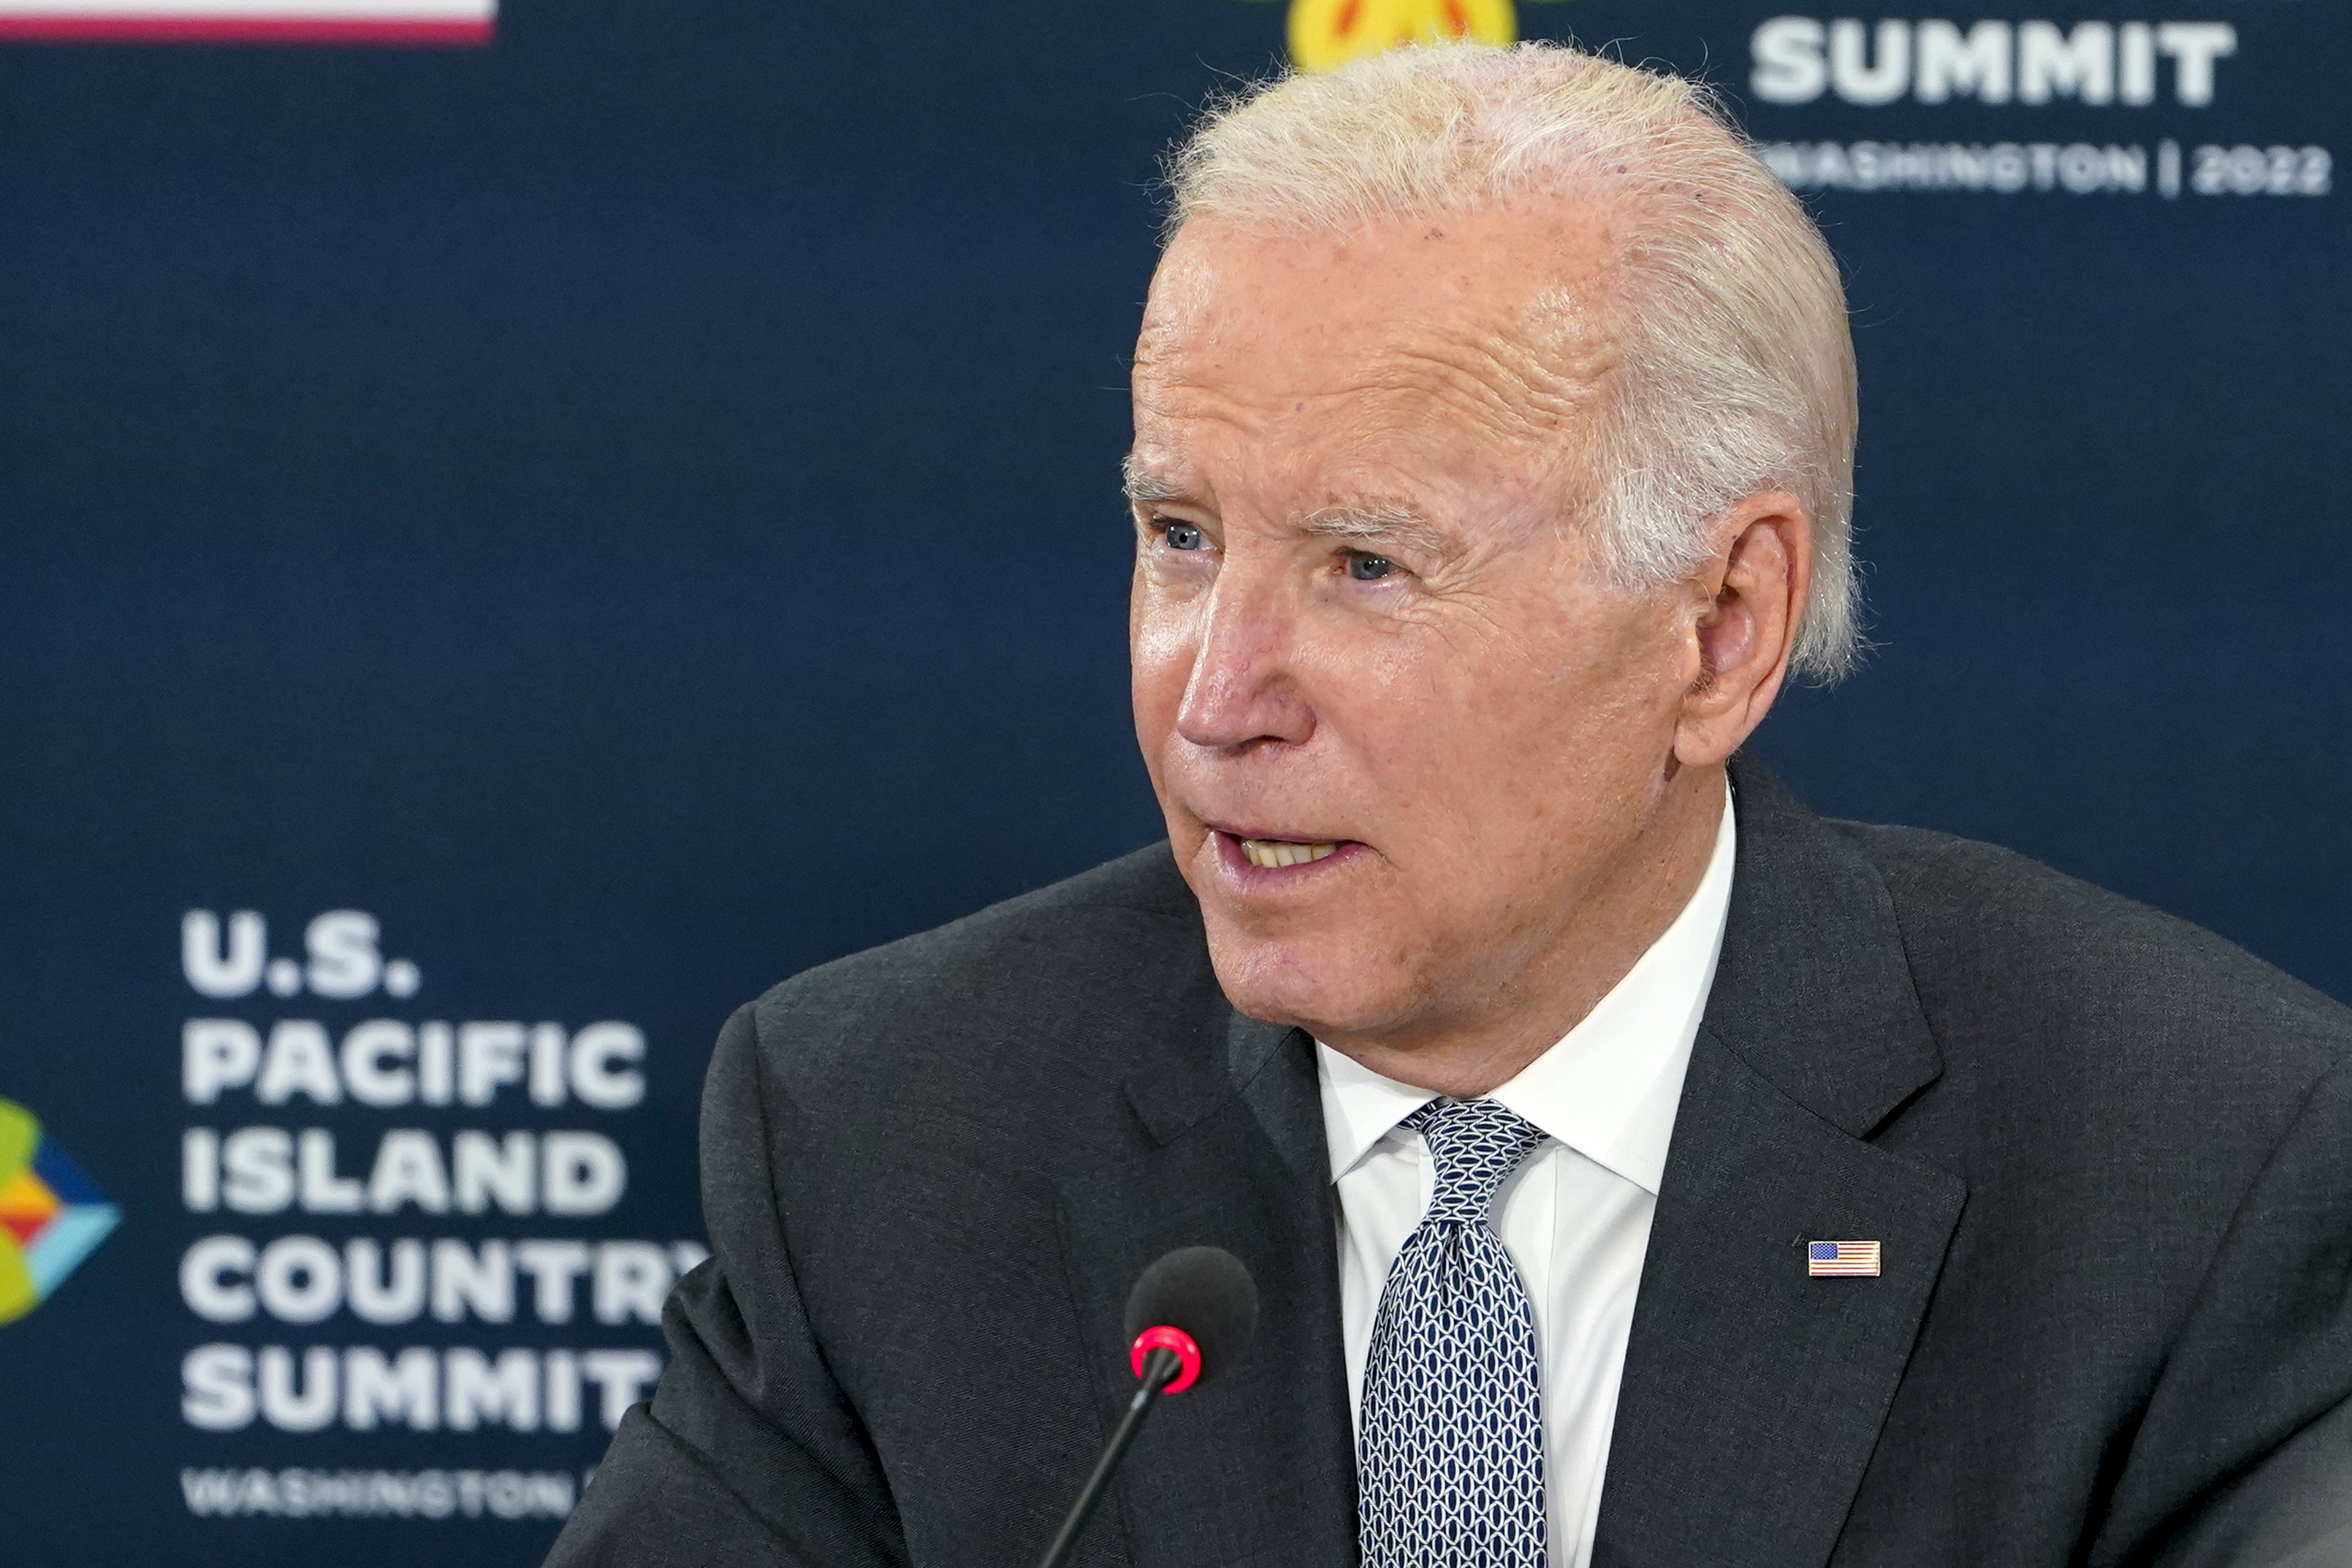 President Joe Biden speaks during the US-Pacific Island Country Summit at the State Department in Washington, September 29, 2022. Photo: AP Photo